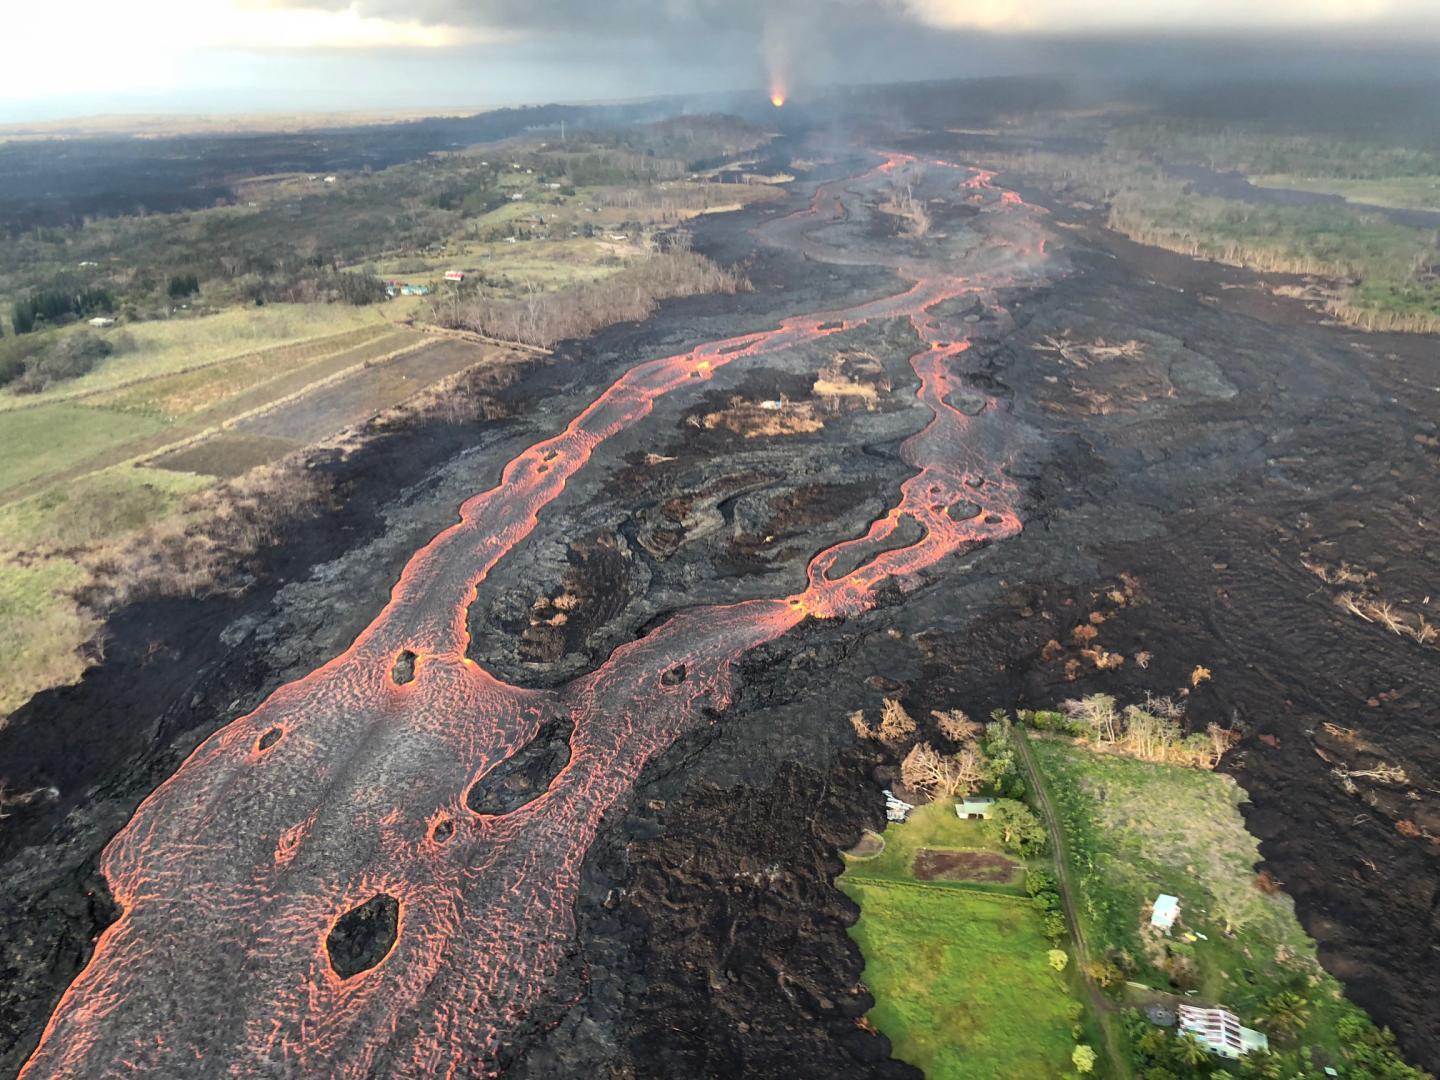 Houses surrounded by lava